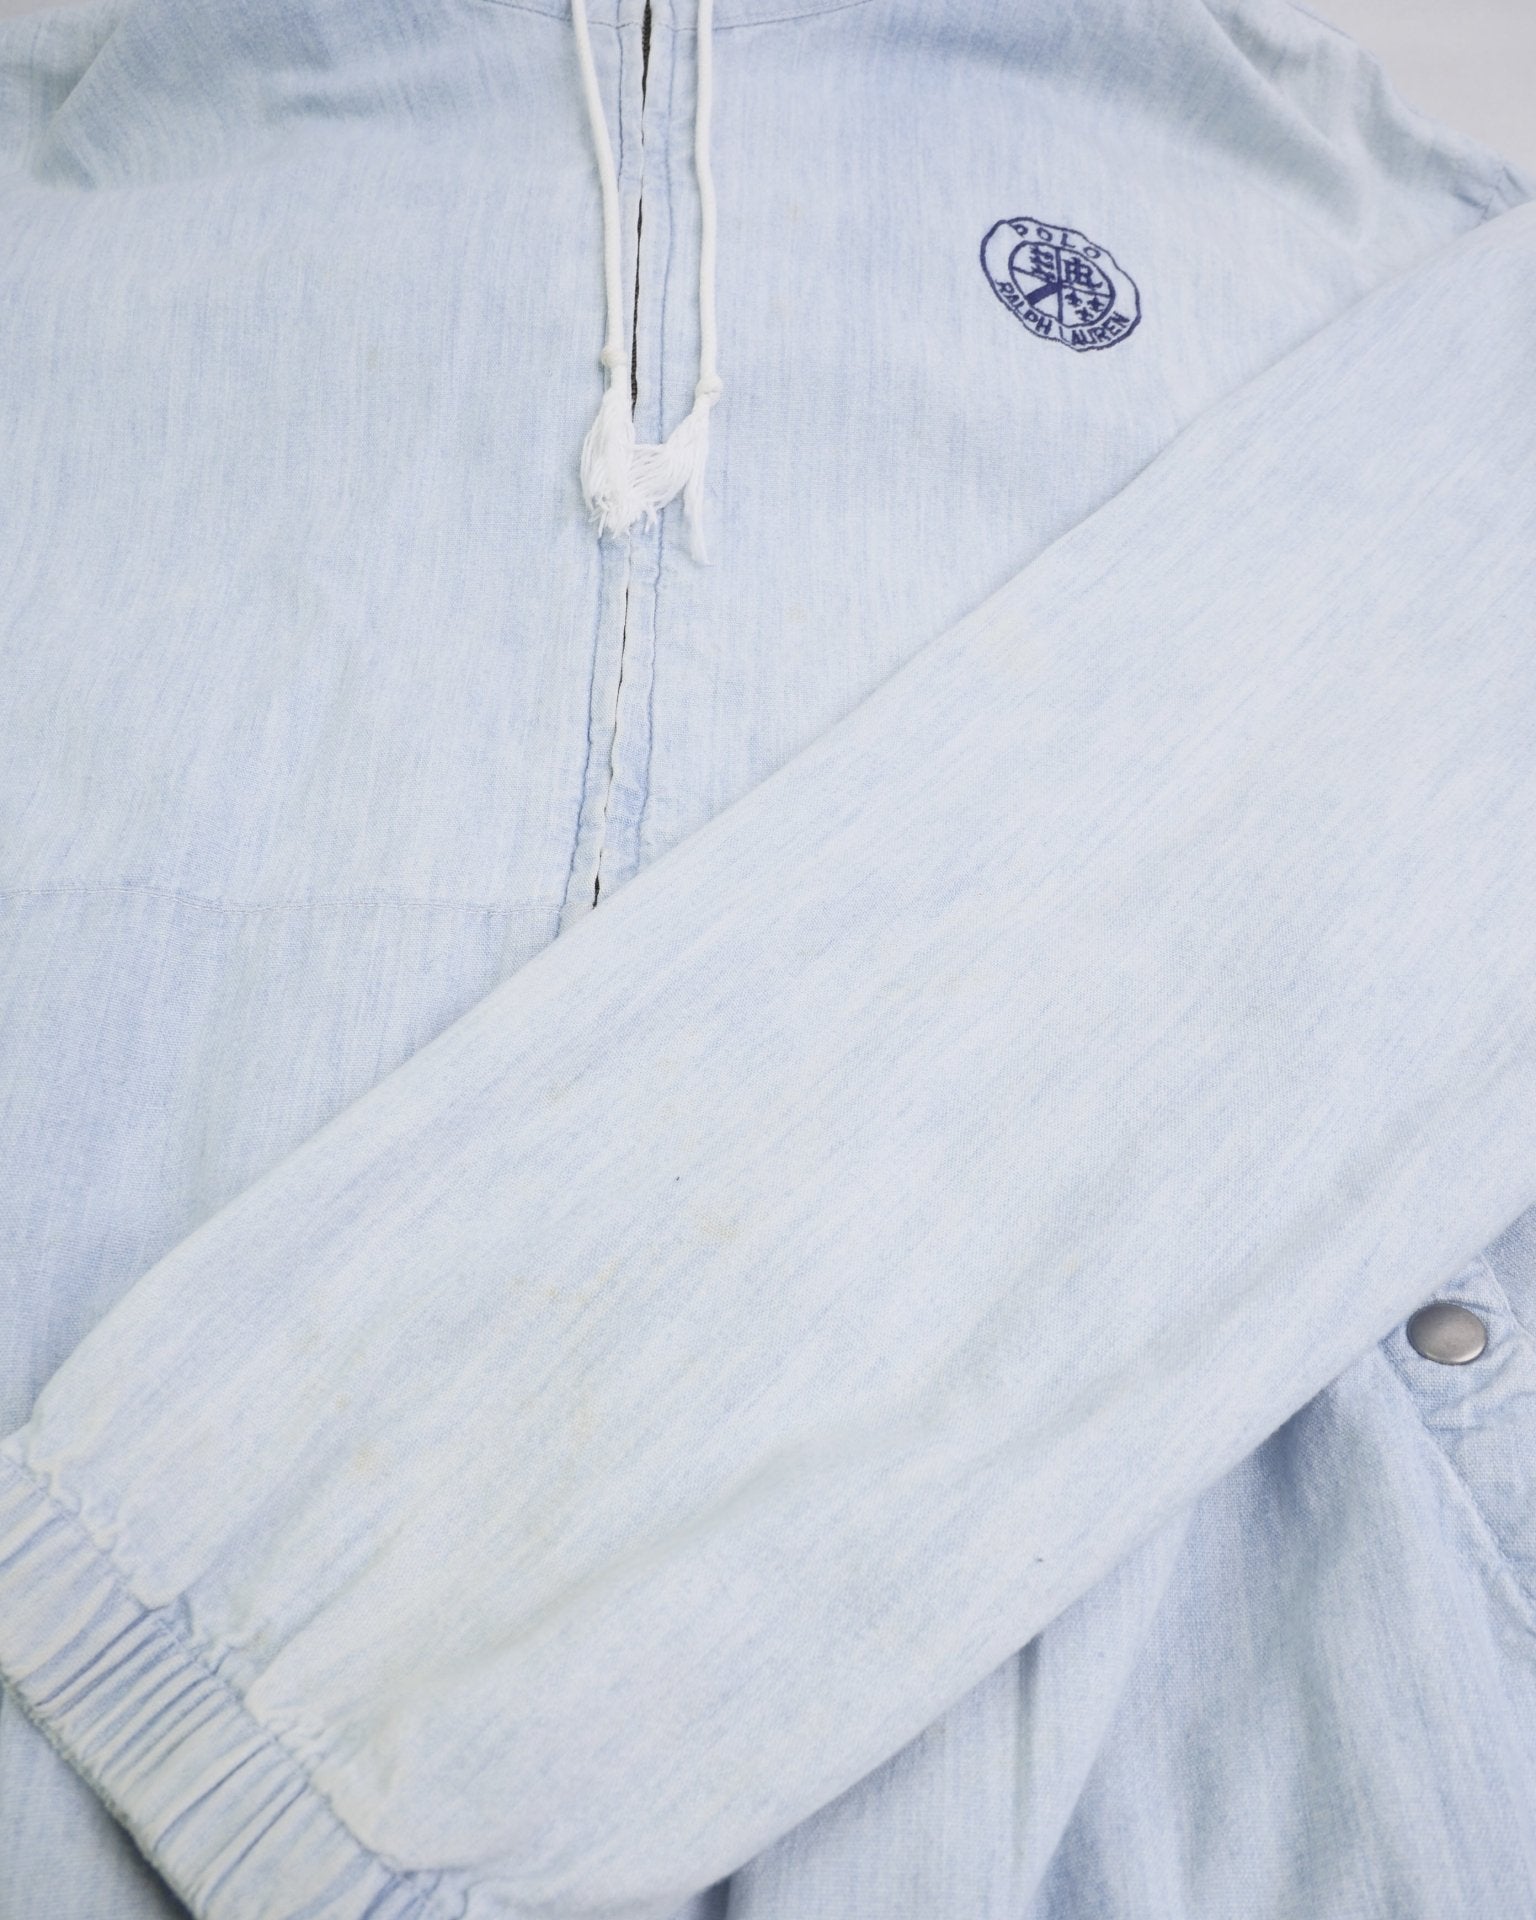 ralph lauren embroidered Logo washed blue Jacke - Peeces